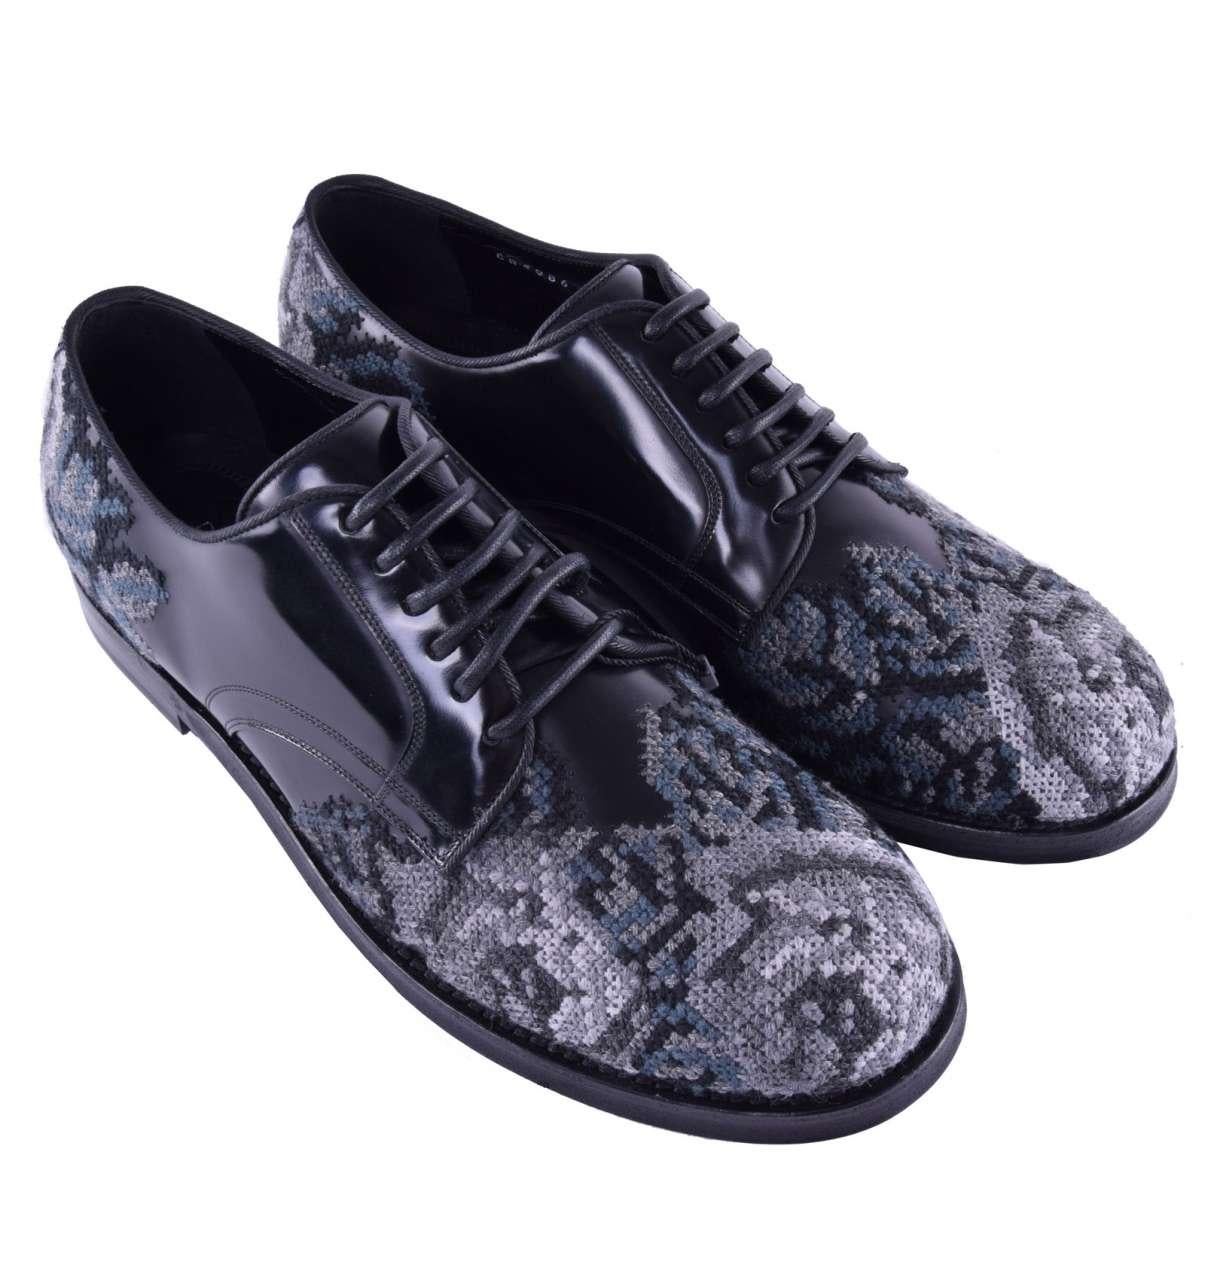 Dolce & Gabbana - RUNWAY Baroque Embroidery Shoes EUR 41.5 In Excellent Condition For Sale In Erkrath, DE